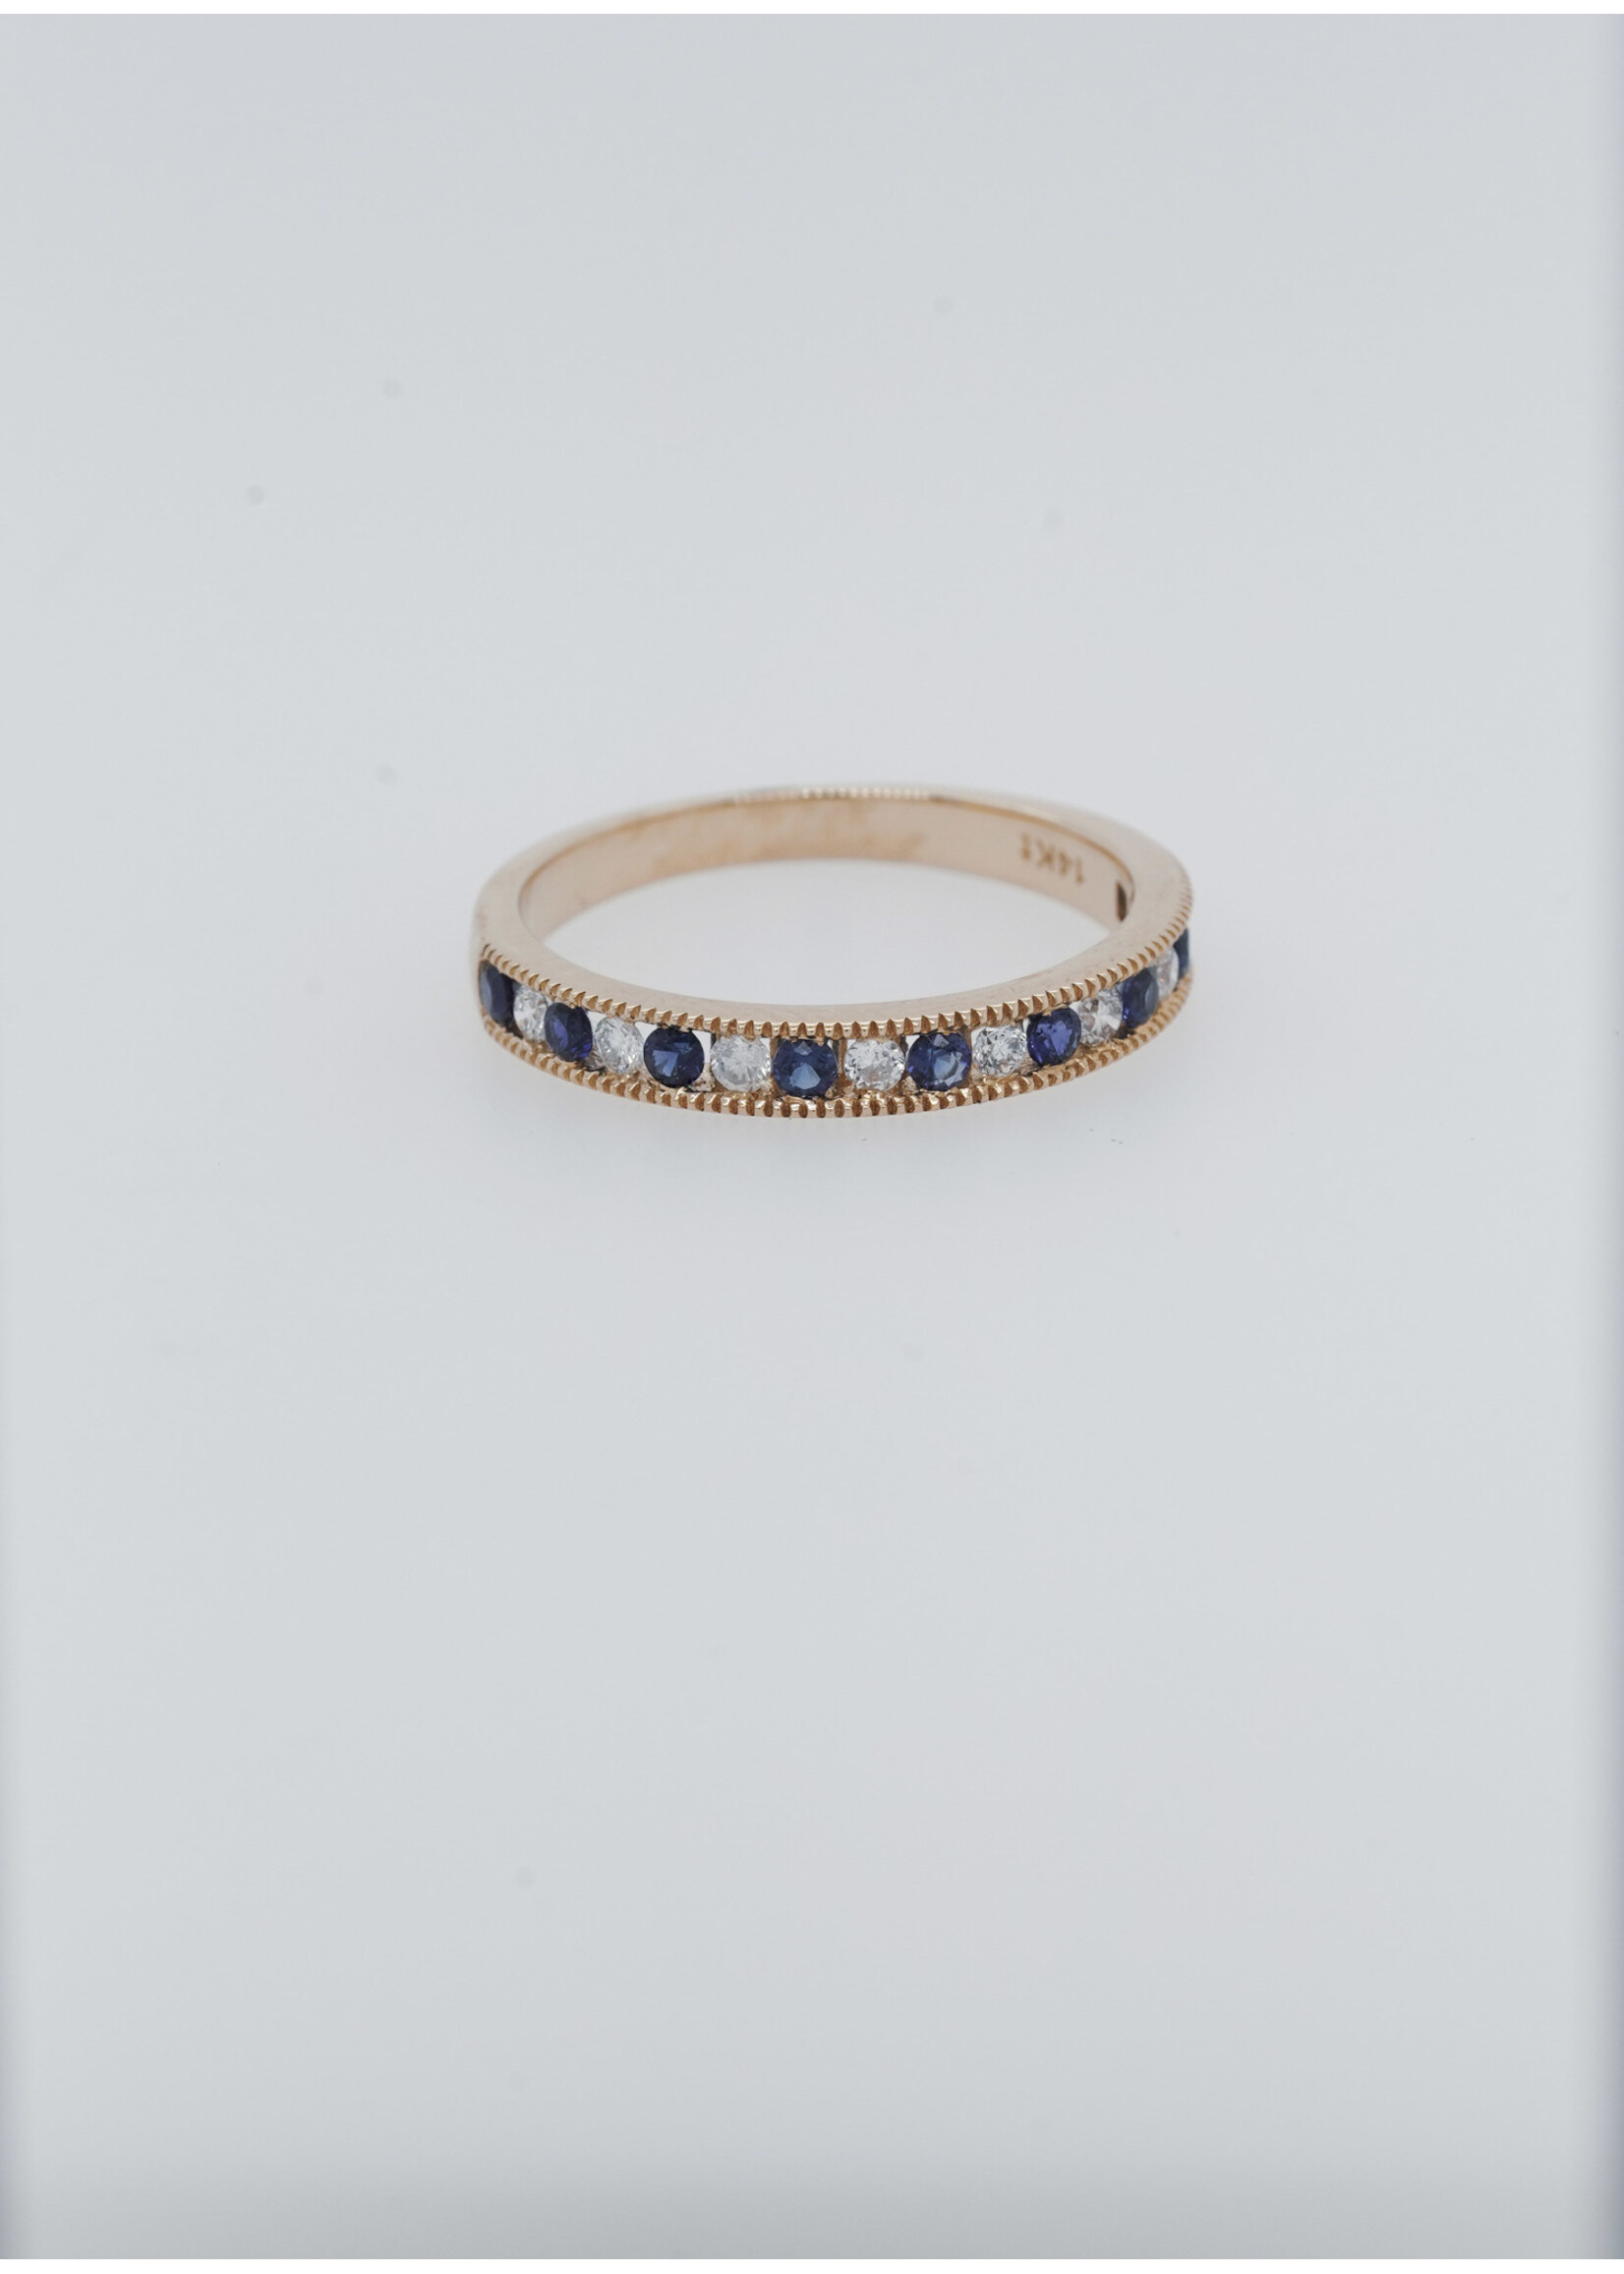 14KY 2.2g .20ctw Diamond .30ctw Sapphire Stackable Band (7.25)